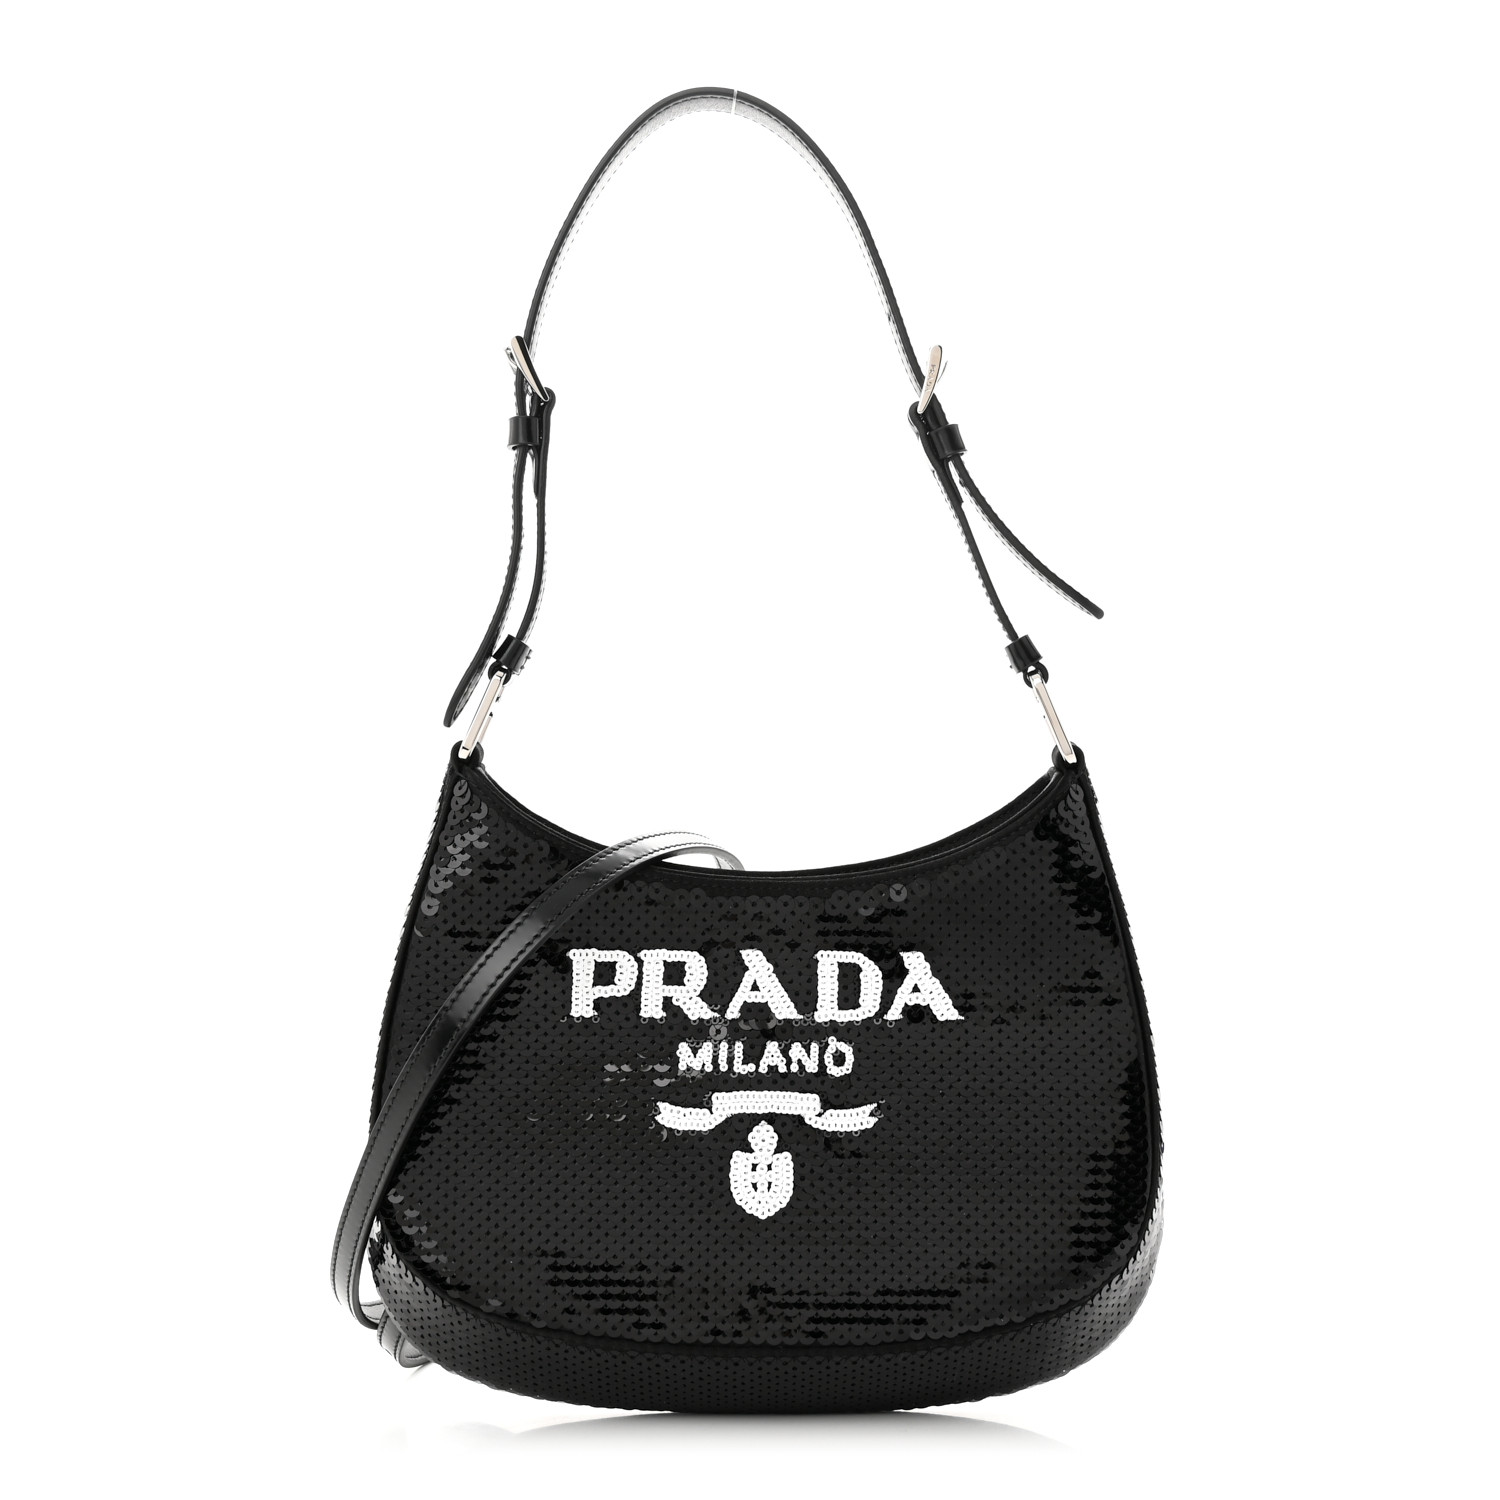 front view image of a PRADA Paillettes Sequin Cleo Shoulder Bag in the colors Black and White by FASHIONPHILE